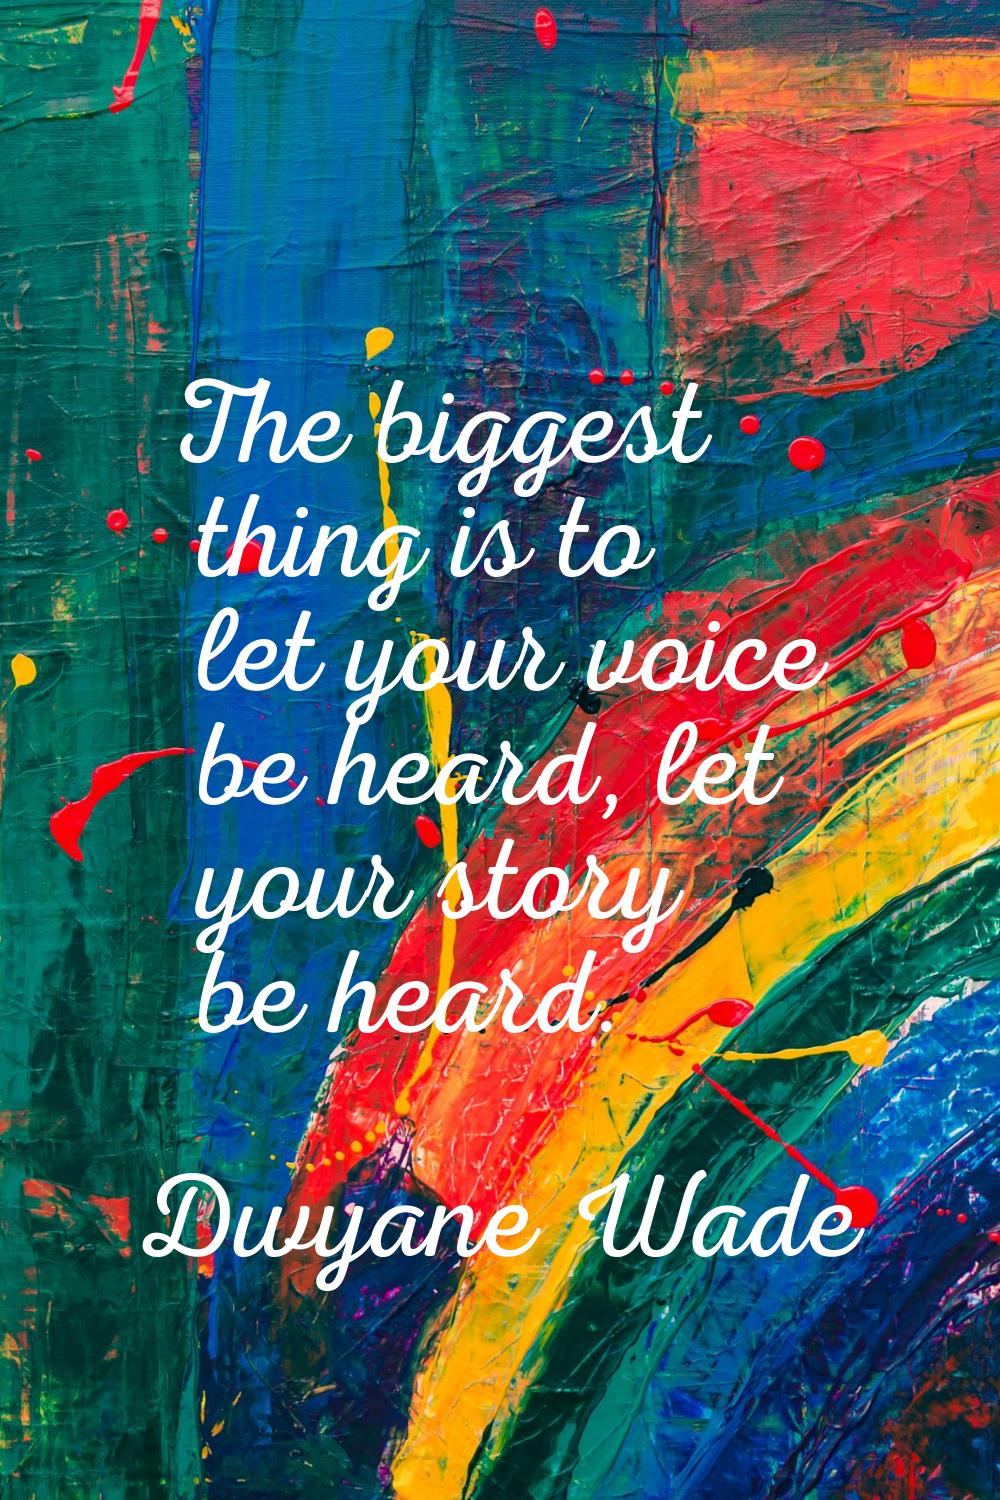 The biggest thing is to let your voice be heard, let your story be heard.